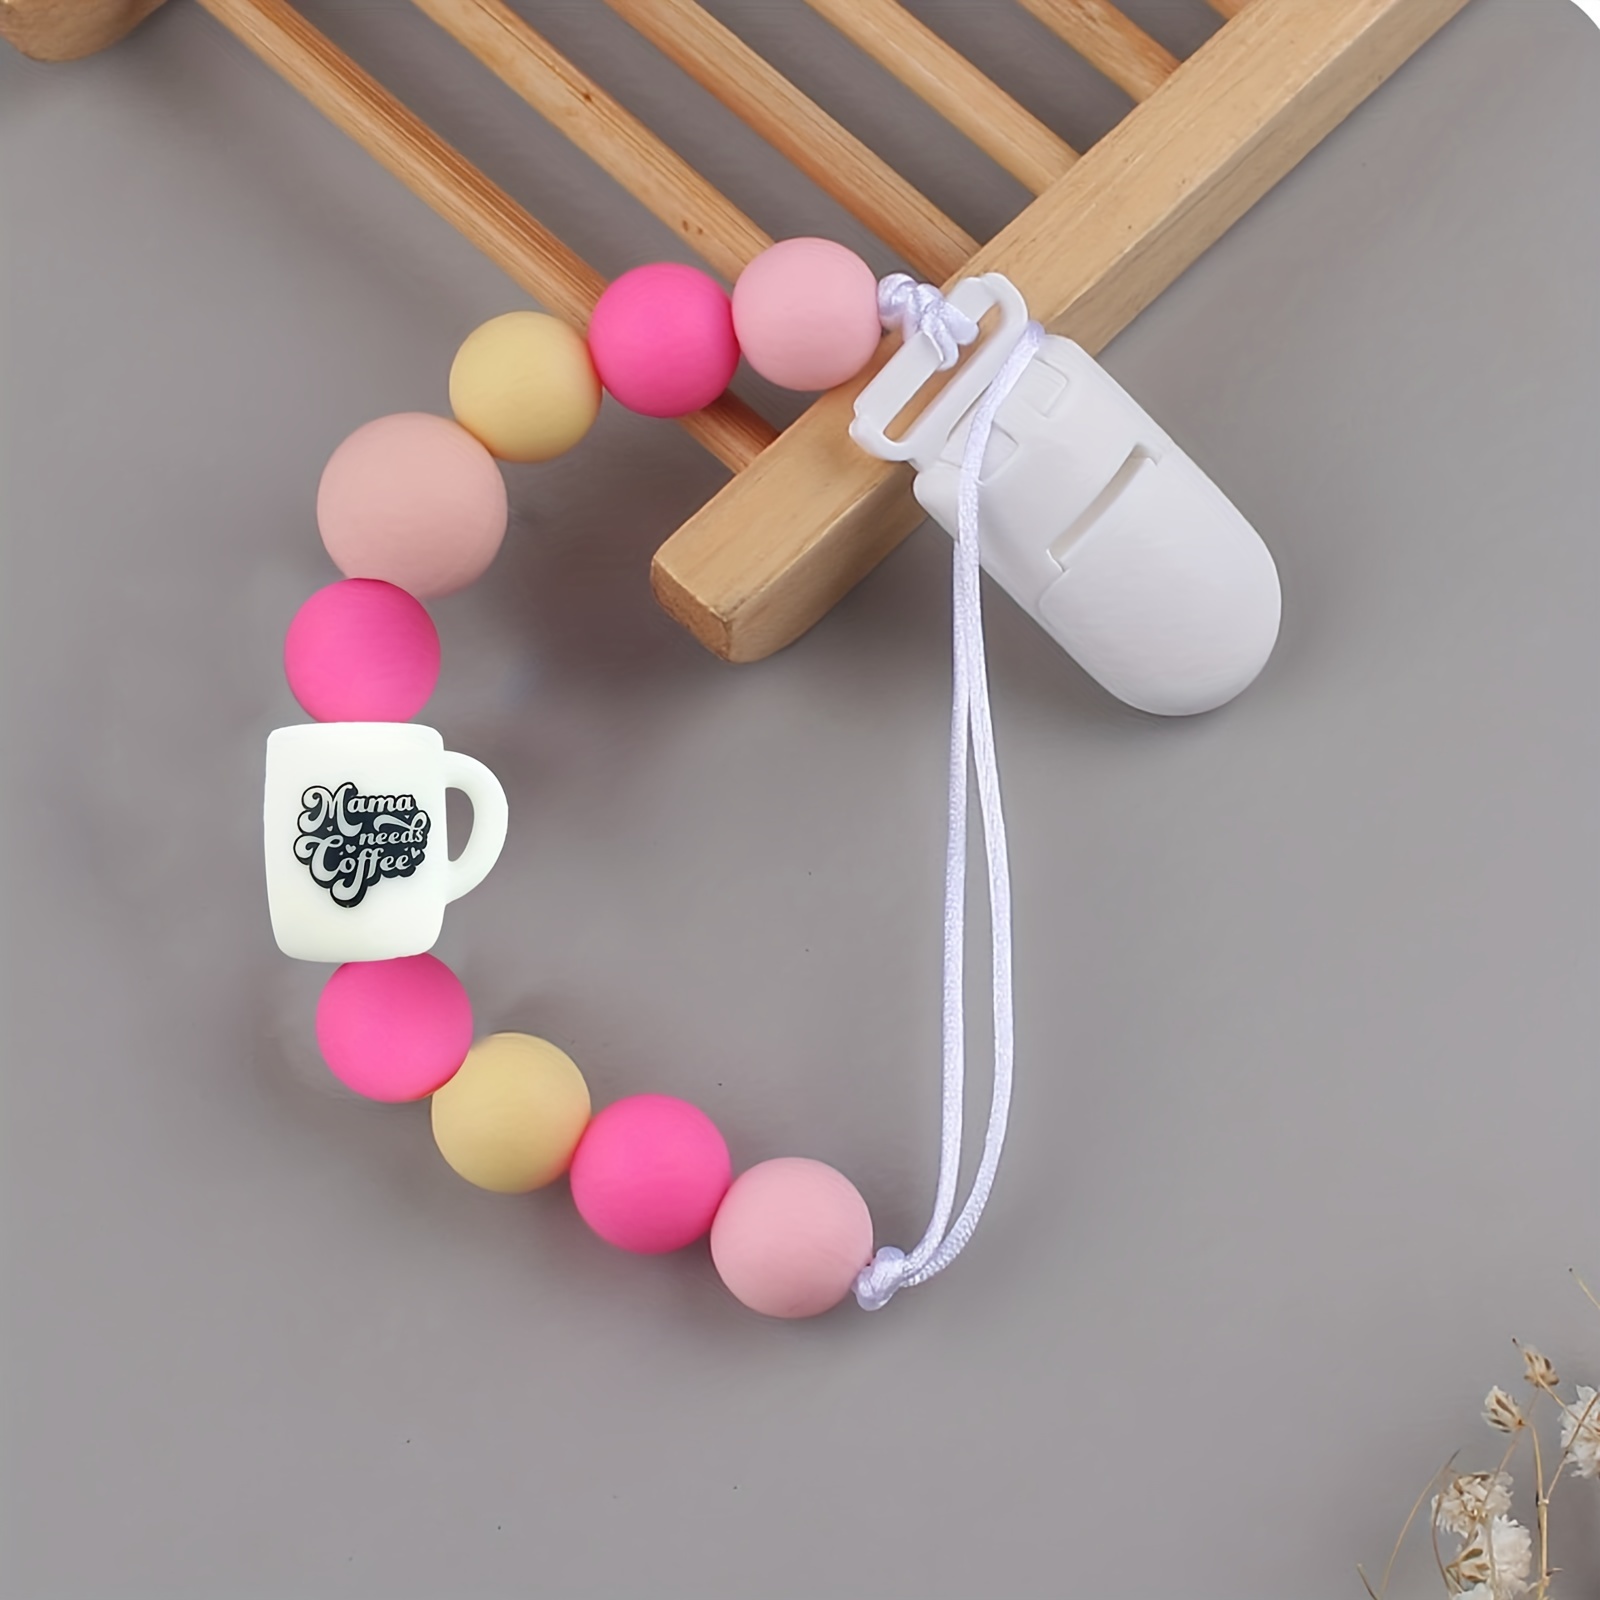 Coffee Cup Shape Baby Teething Silicone Focal Beads for Pen Making - China  Silicone Beads and Focal Beads price